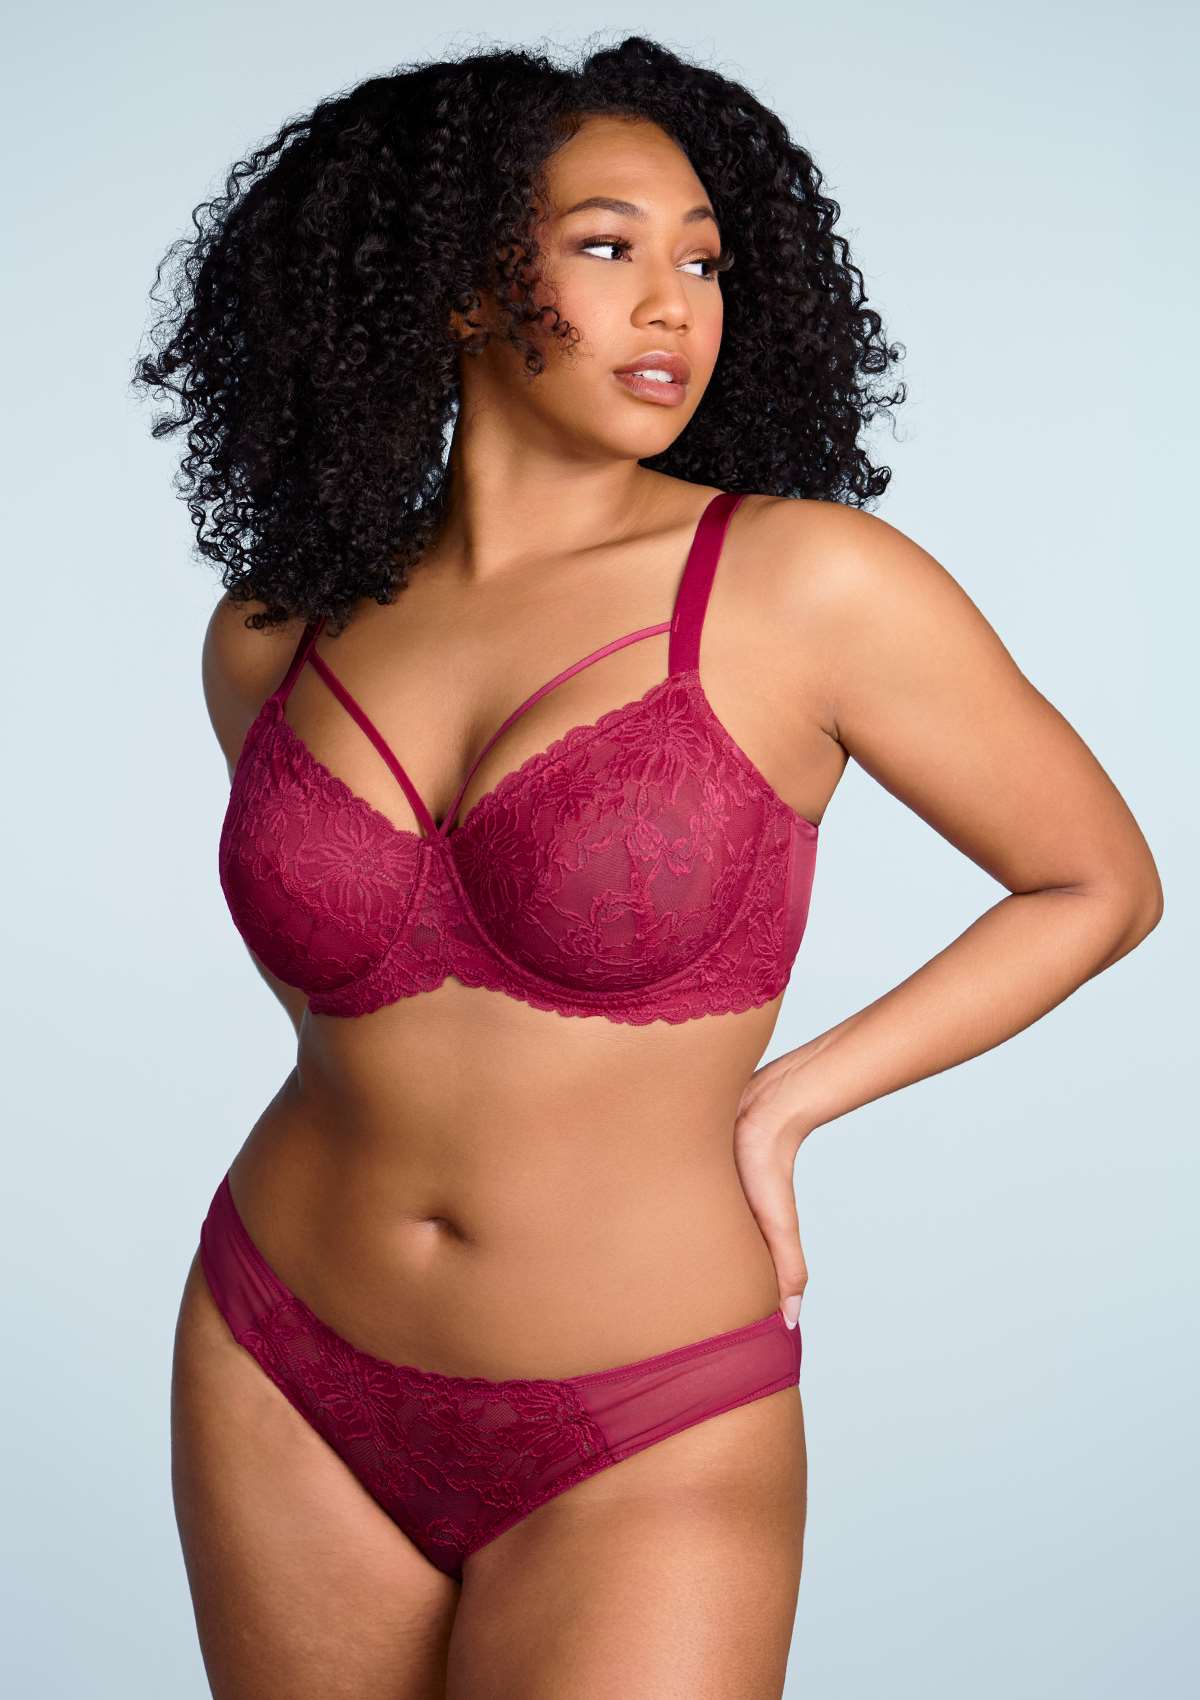 HSIA Pretty In Petals Lace Panties And Bra Set: Plus Size Women Bra - Red / 42 / C